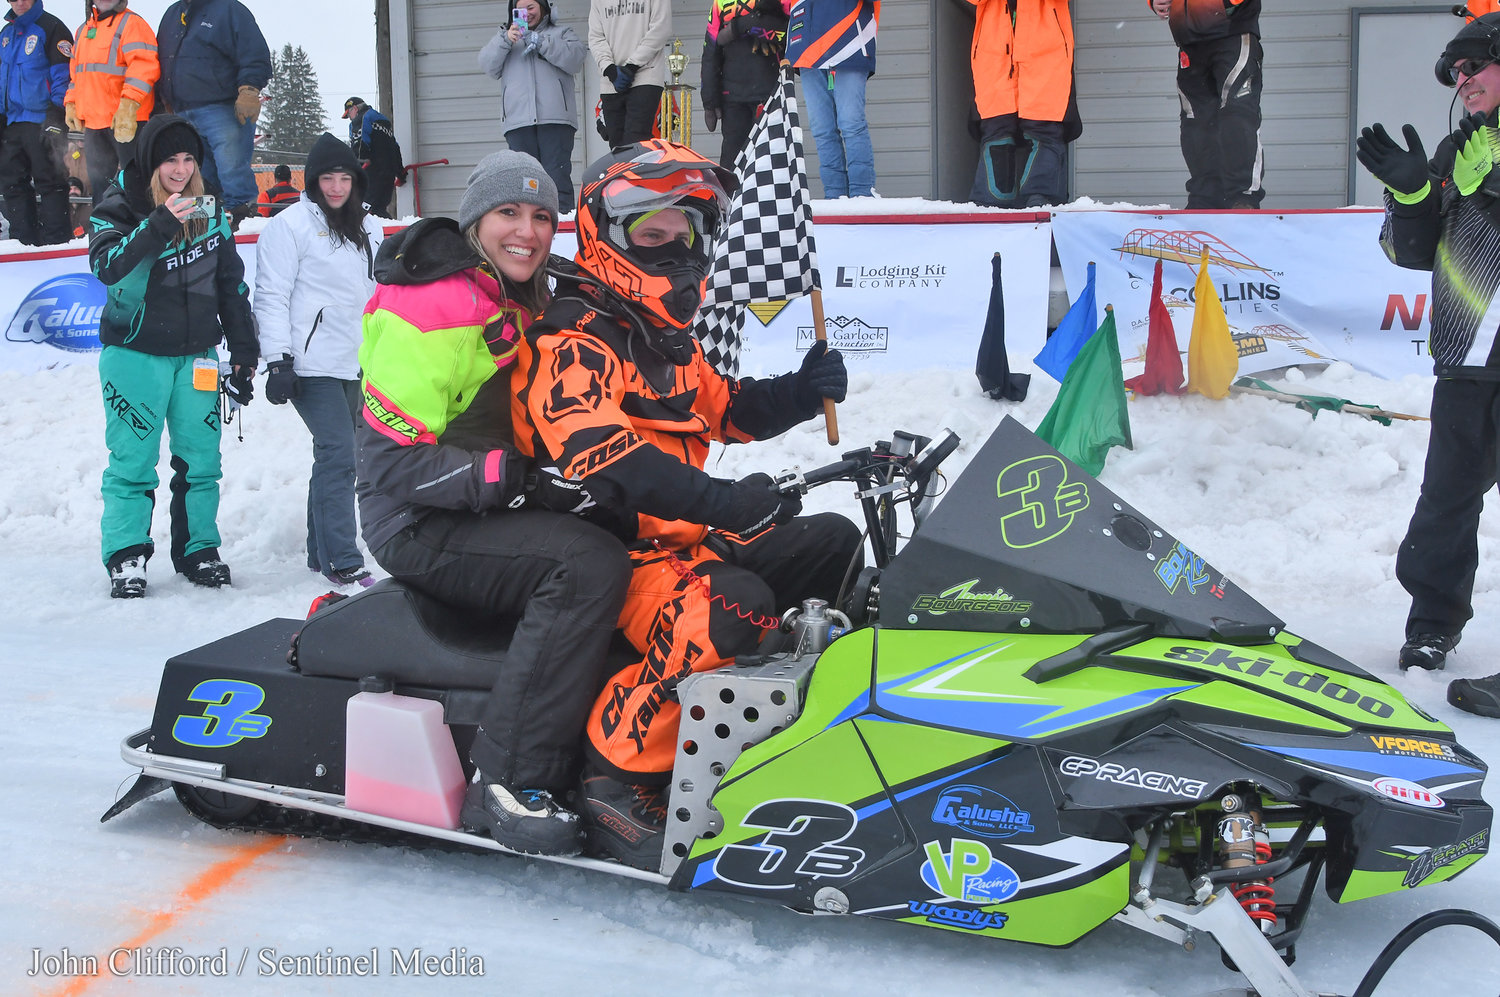 Dream come true- Jamie Bourgeois andhis wife Ashley from Boonville  head out on the track for a victory lap after winning the 2023 Pro Champ Adirondack Cup winner in victory lane Sunday, January 29. Bourgeois said he has been trying to win this race since it came back in 2006 or 2007 to for the last 15 years. He credited a new sled and motor package and people helping him out for his win. Bourgeois races all over Canada and has been out to Wisconsin to race but this is the "one I've been after my hometown track" race.